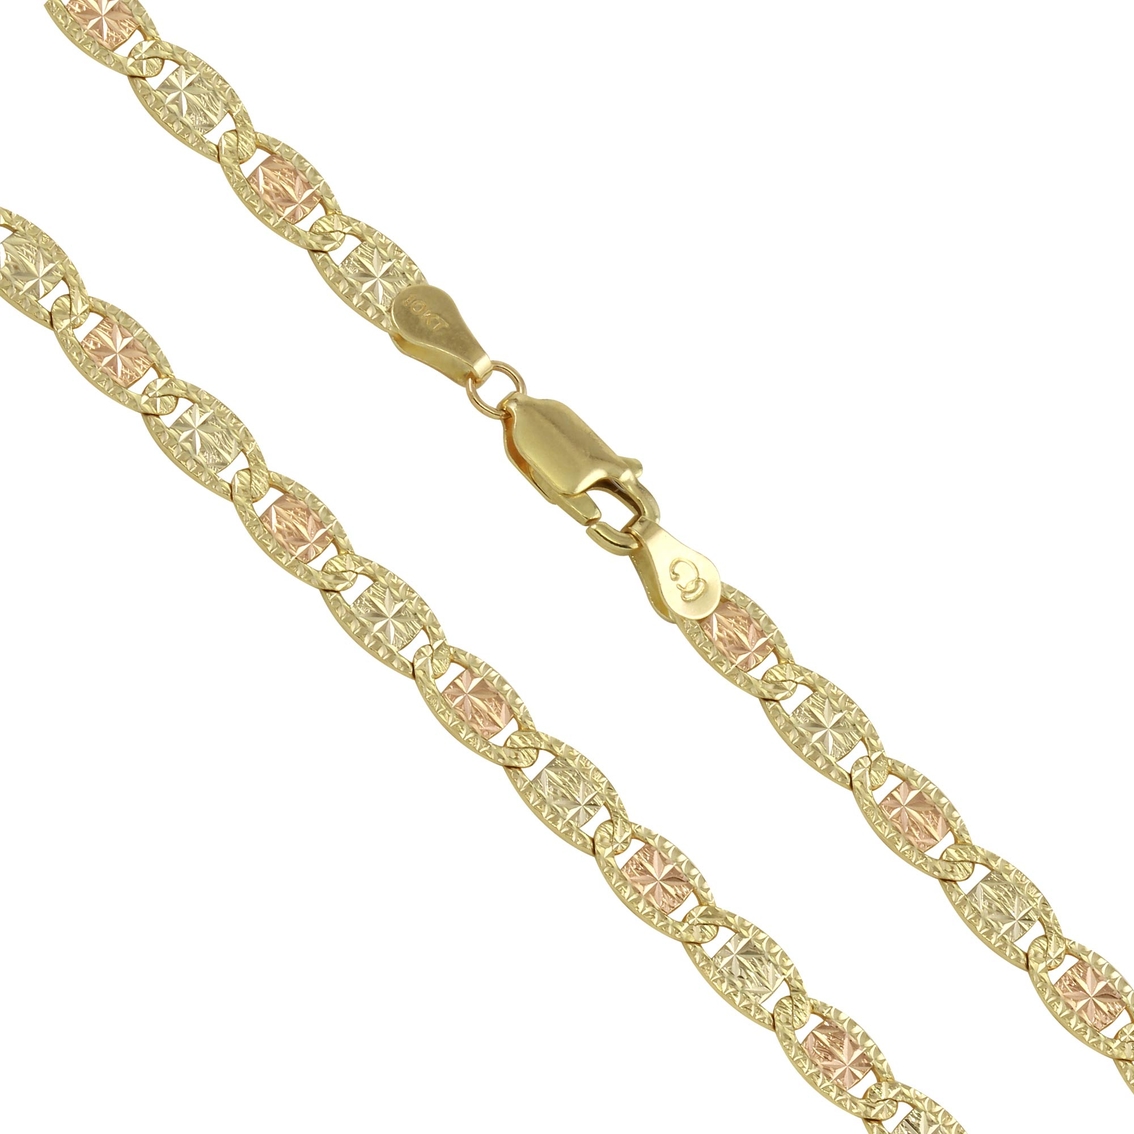 10K Tri Color Gold 5mm Valentino Chain, 22 or 24 In. - Image 2 of 2